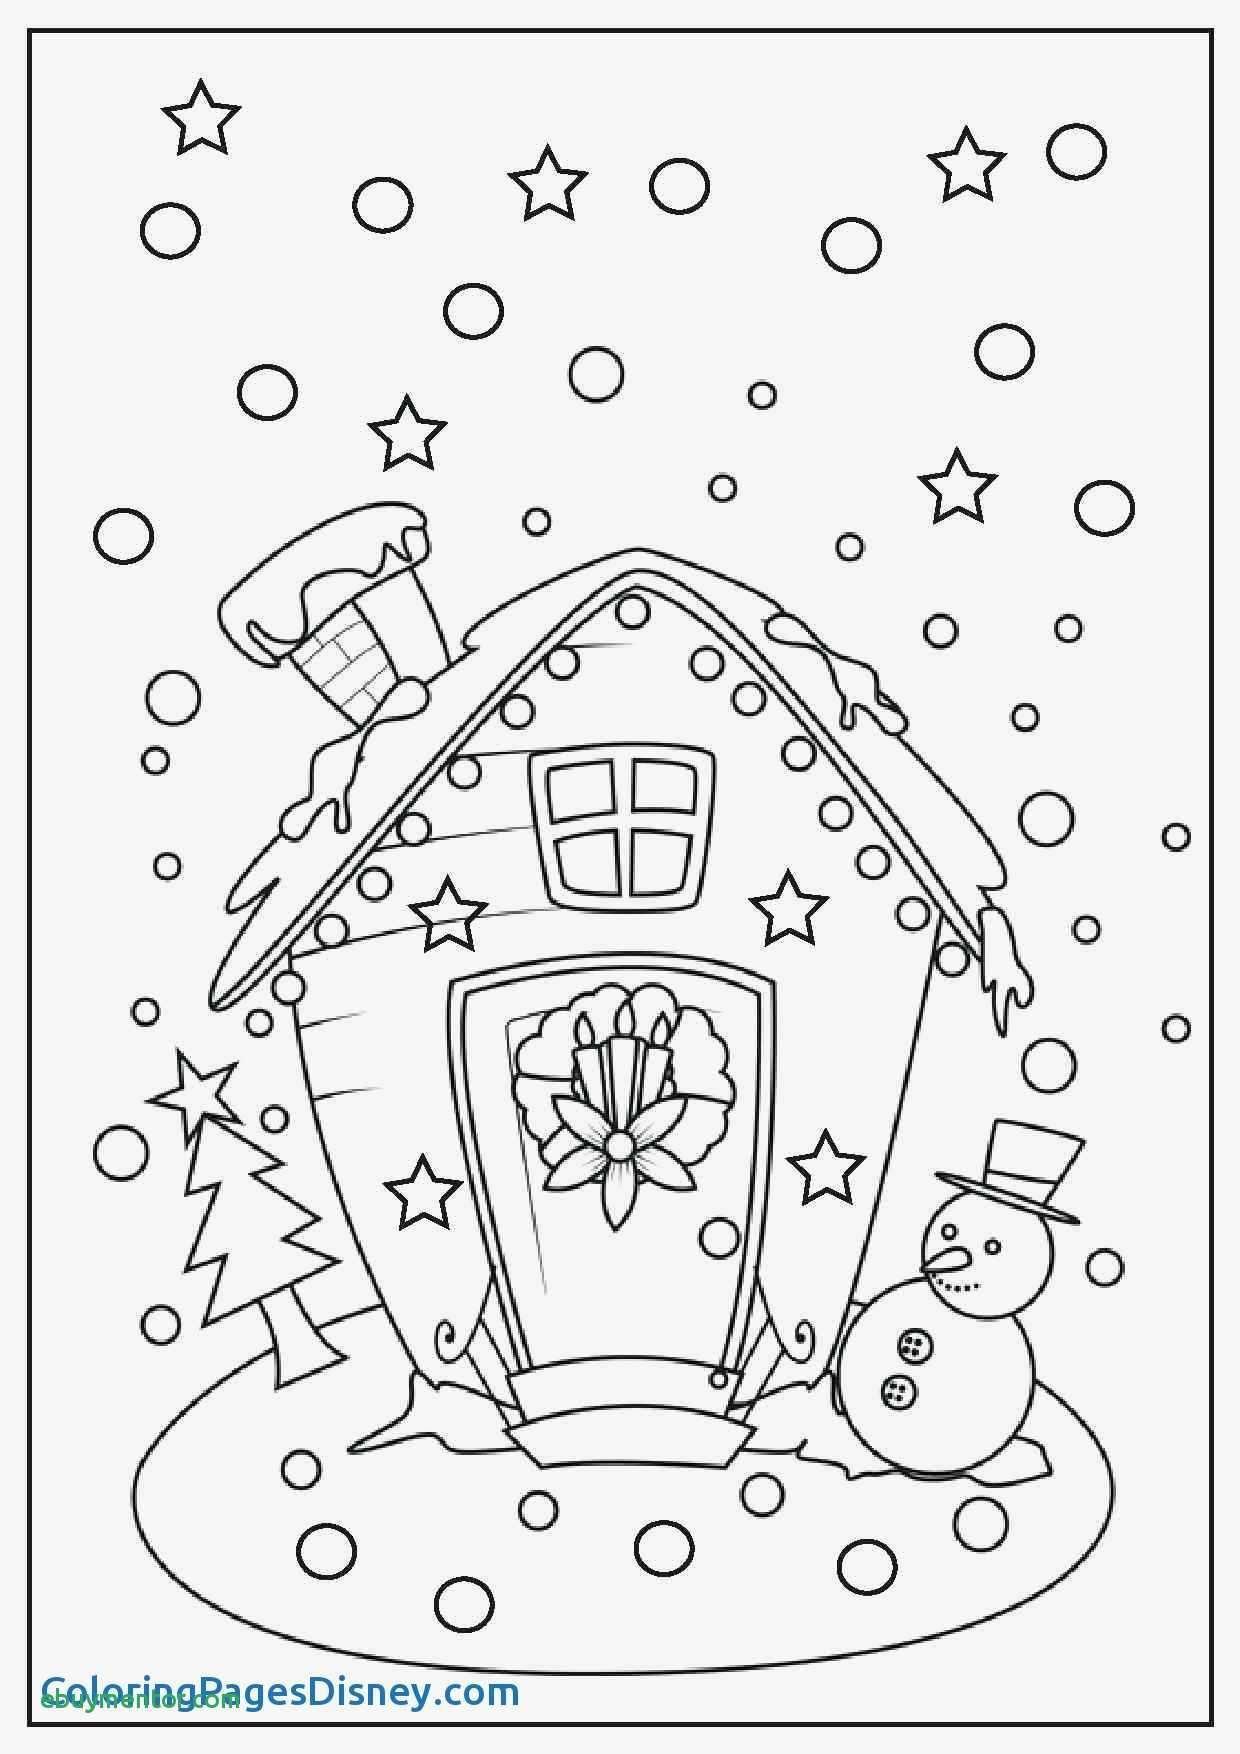 Resurrection Coloring Pages For Preschoolers Coloring Pages Printable Easter Coloring Pages Free Printable